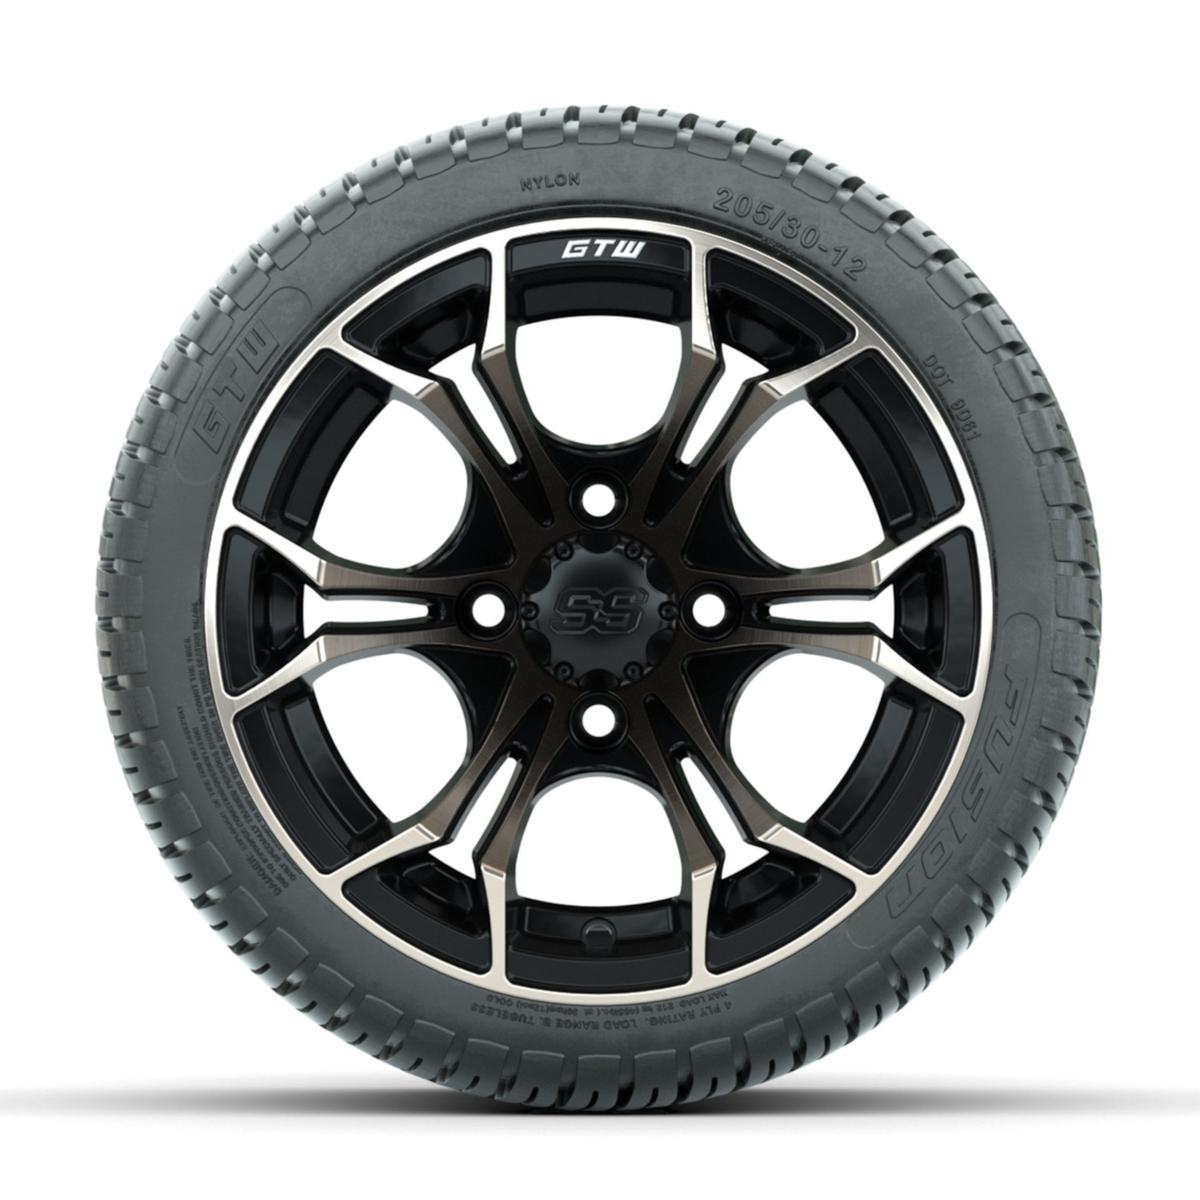 GTW Spyder Bronze/Matte Black 12 in Wheels with 205/30-12 Fusion Street Tires – Full Set